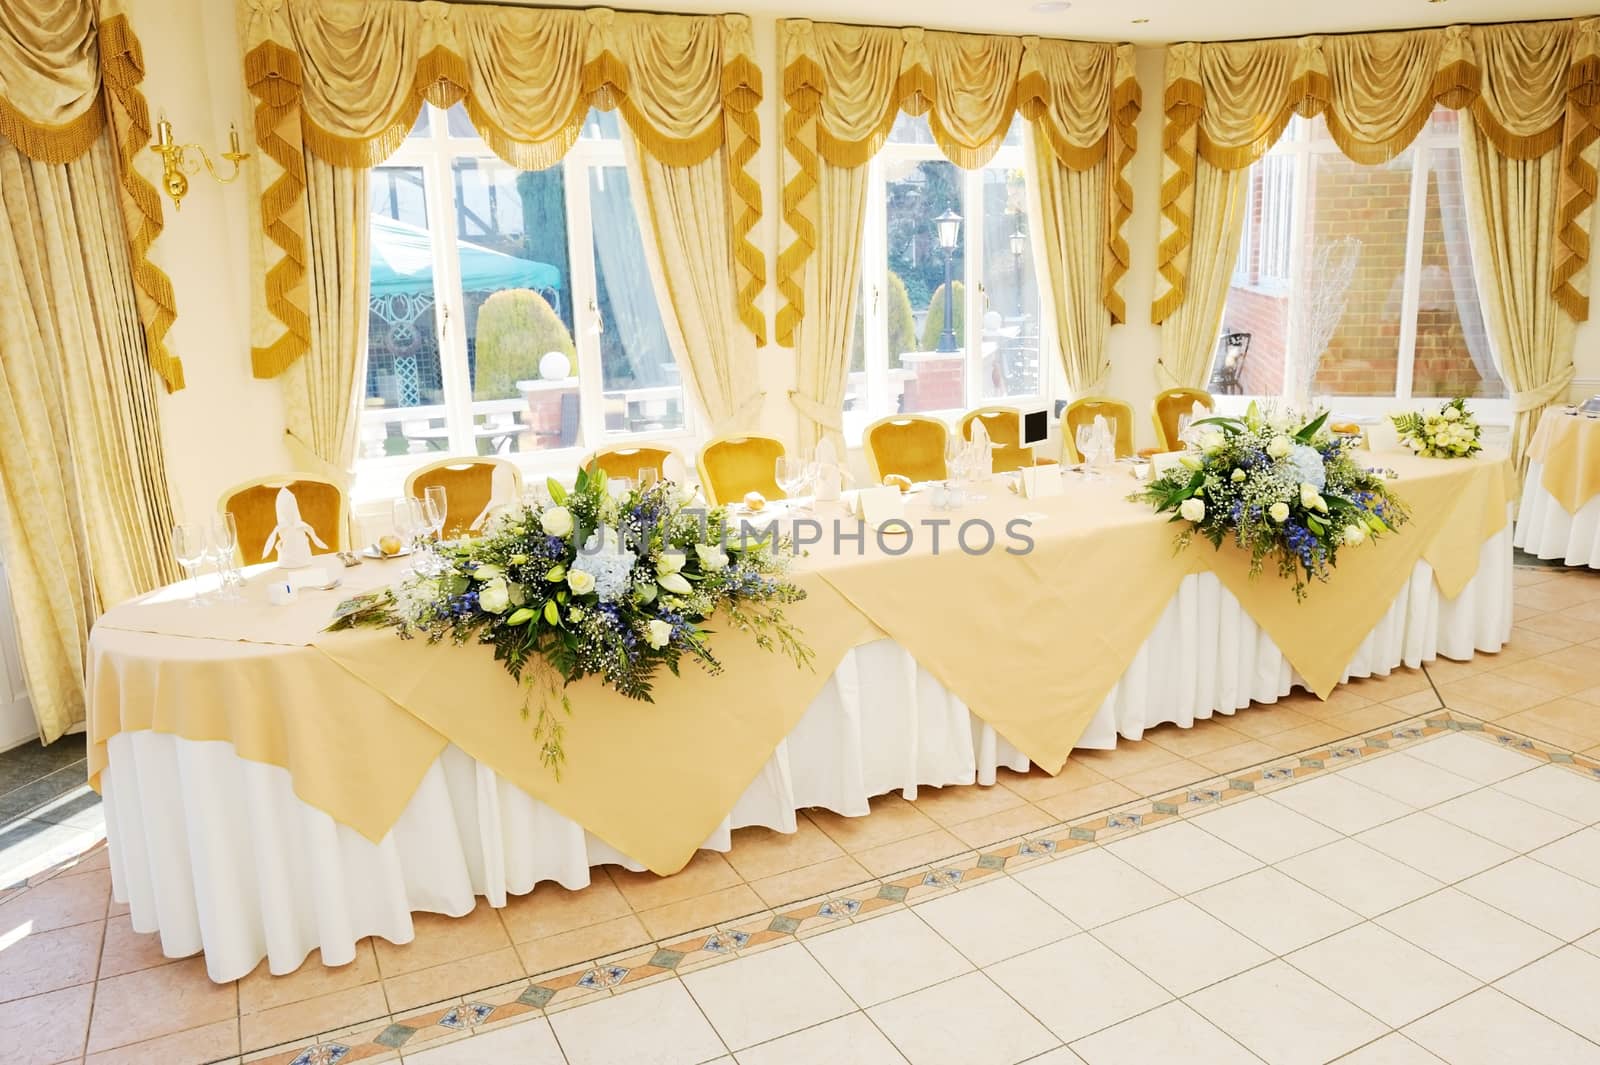 Top Table at wedding reception by kmwphotography